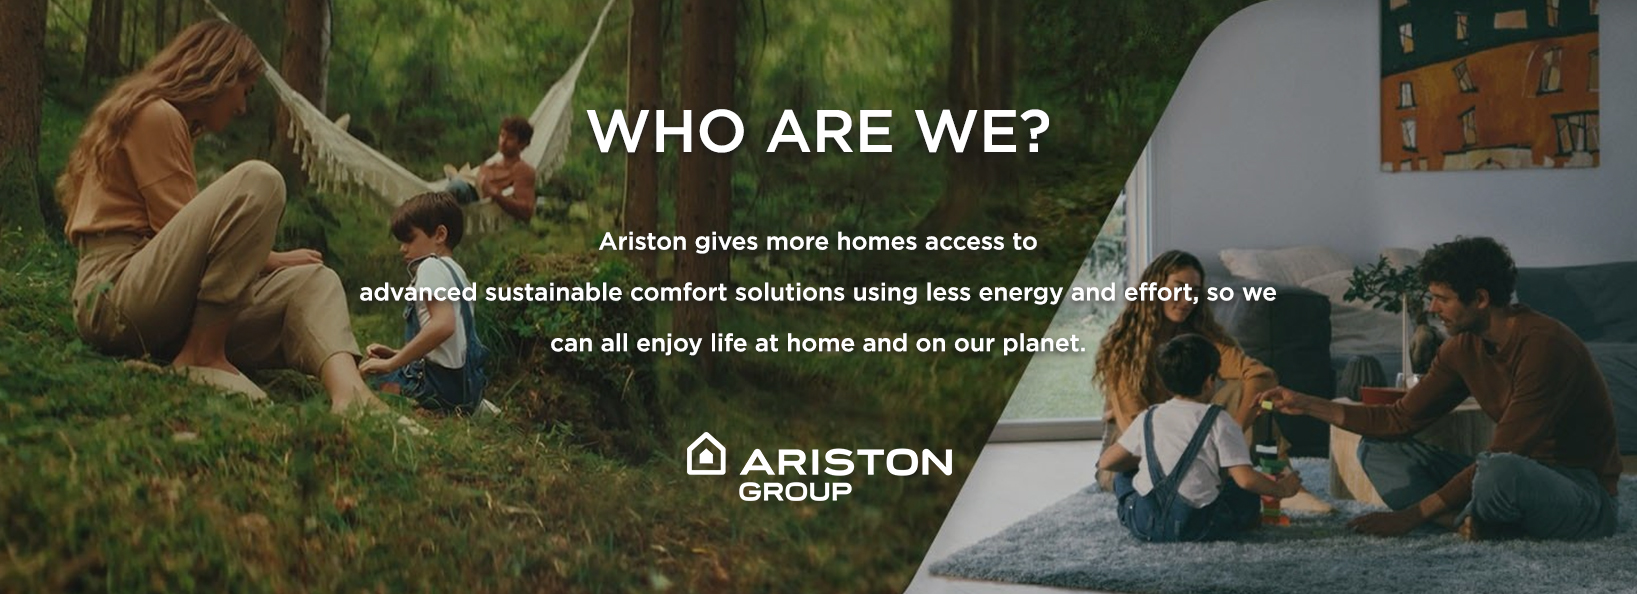 About Ariston Thermo Group